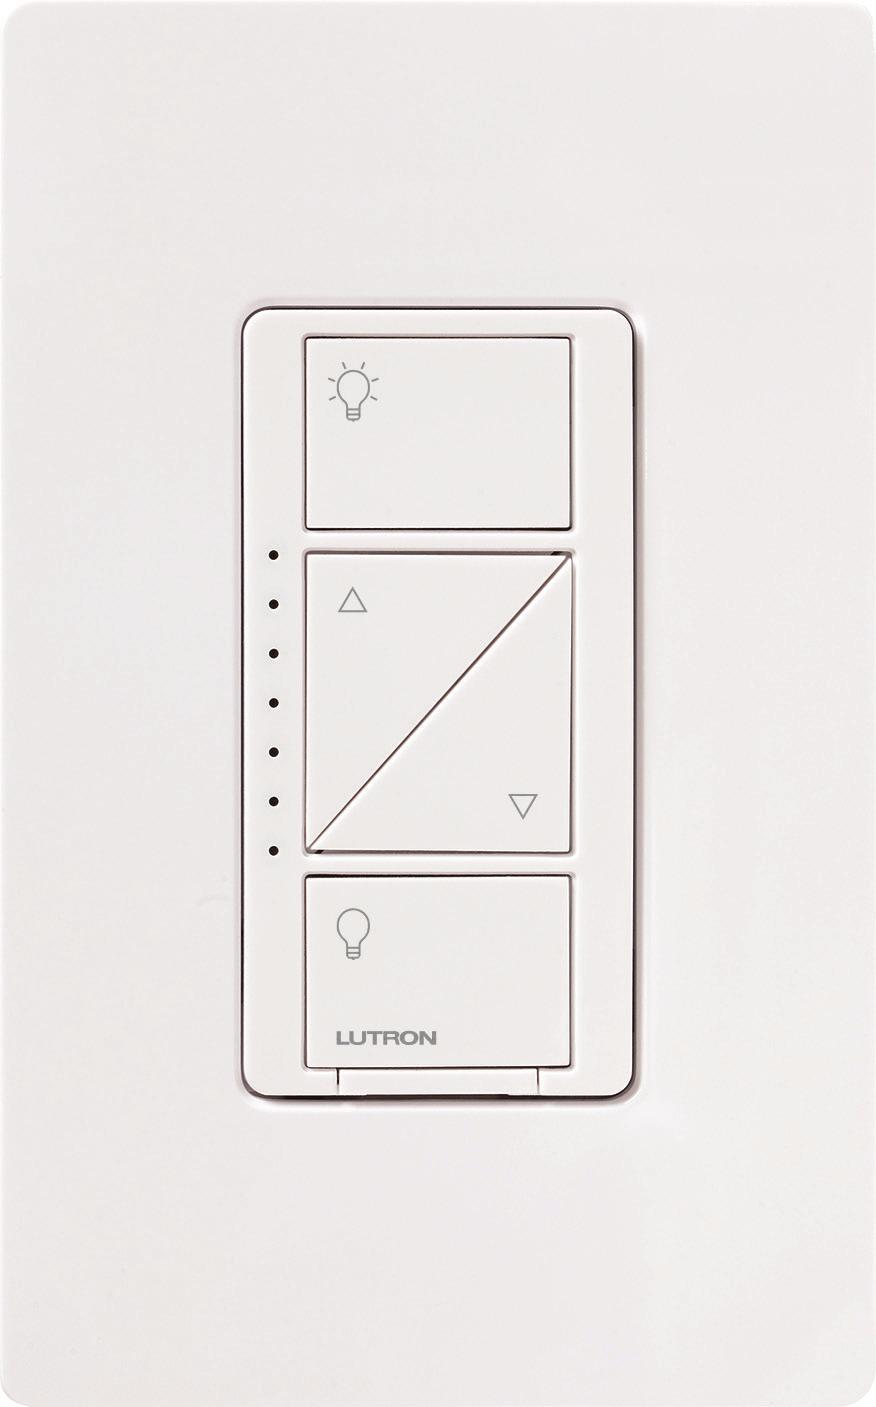 Product information Controls wall and ceiling lights Dimmer Doesn t require a neutral wire ideal for retrofit or new construction No polarity for line or load wiring mistake-proof wiring Works with